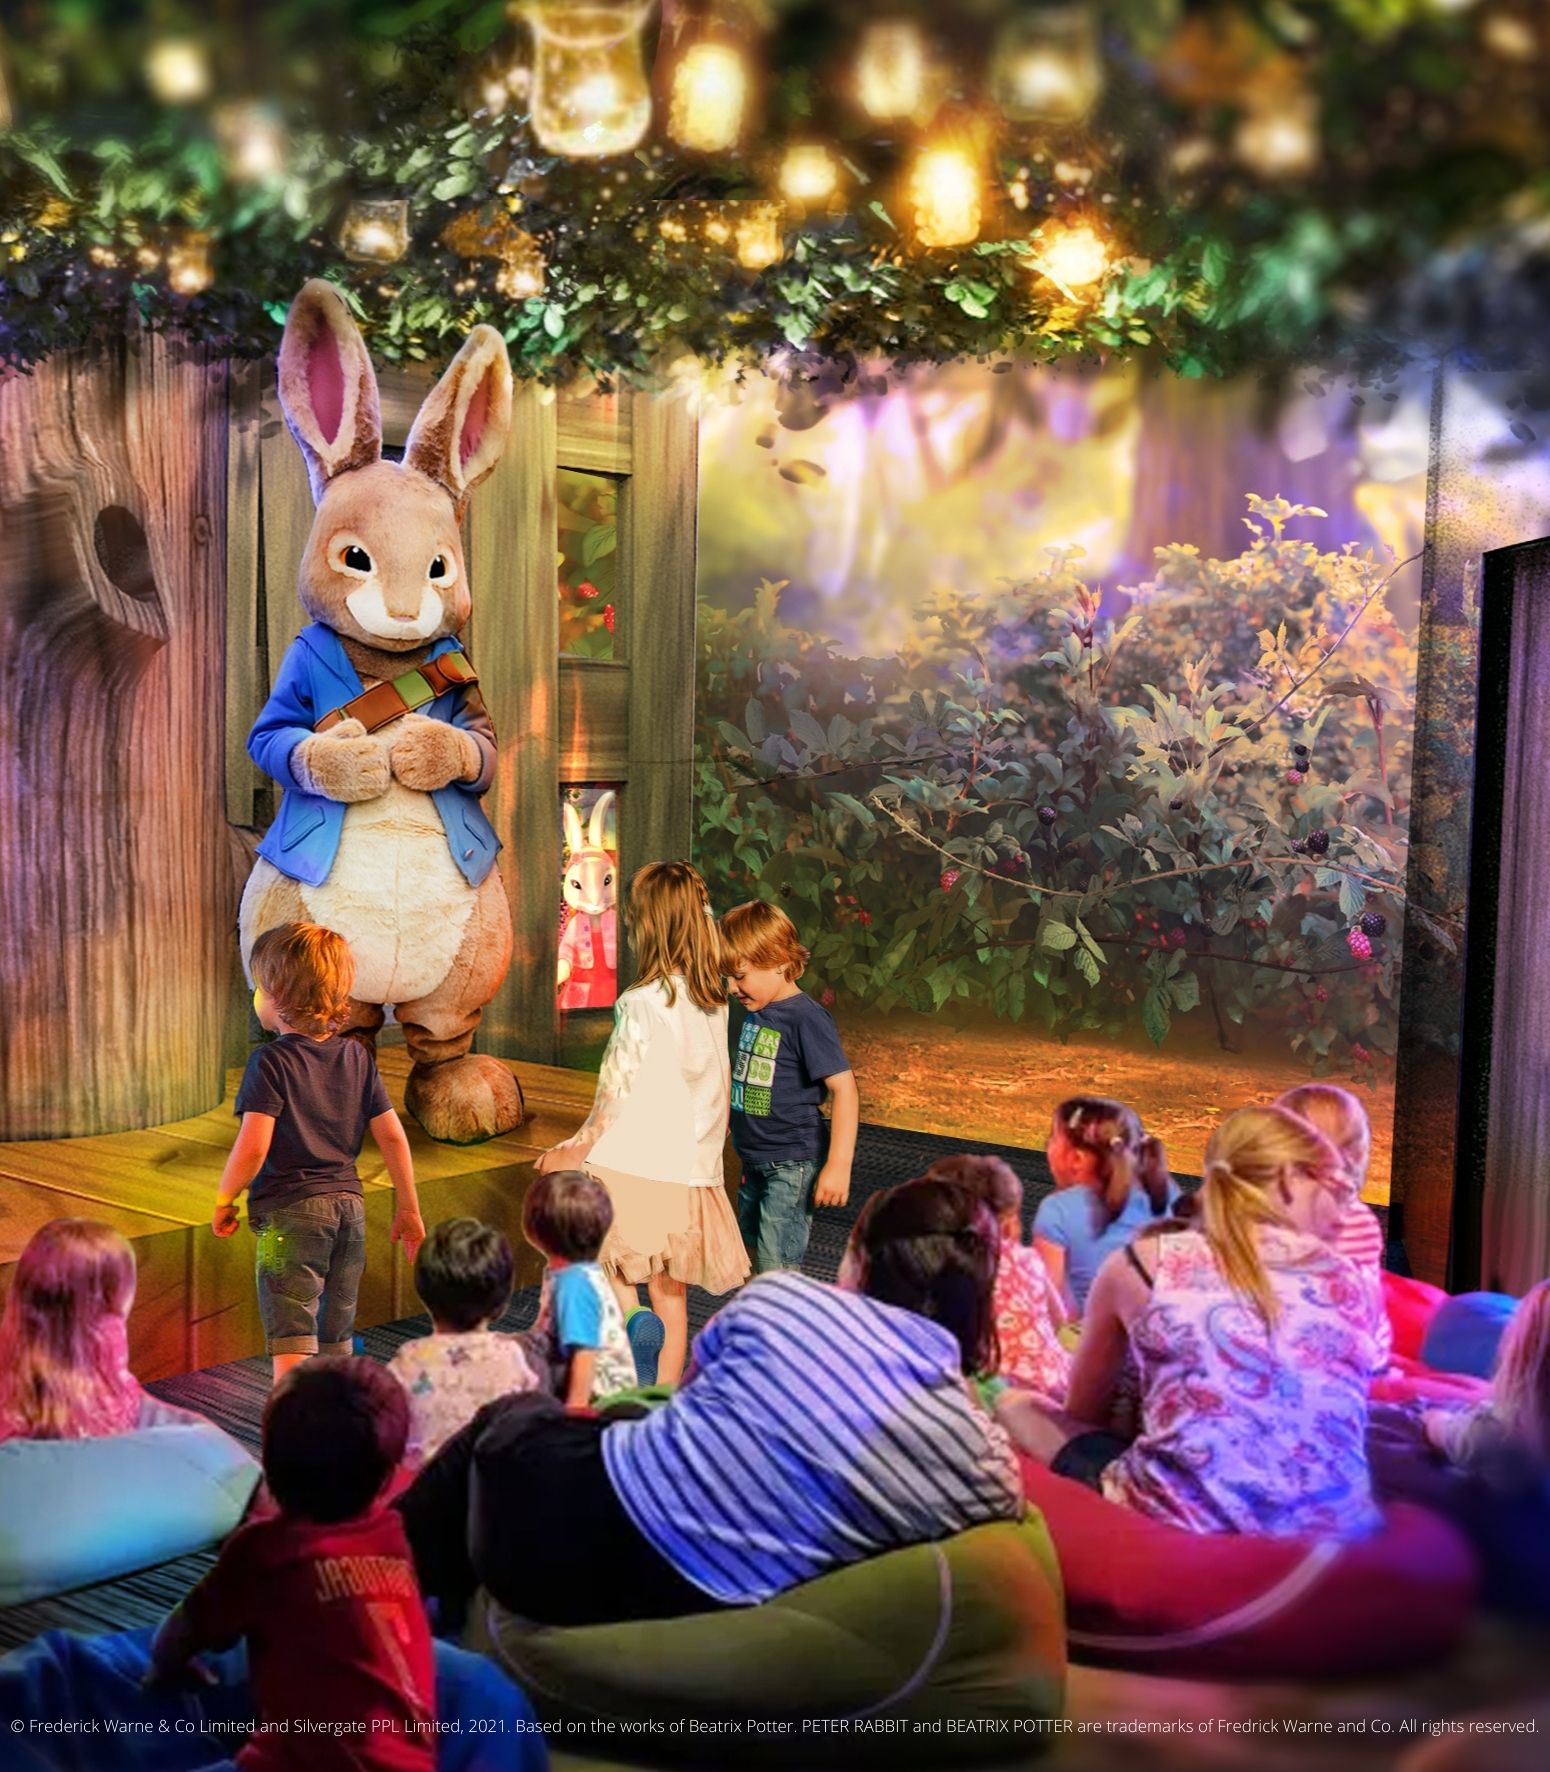 Peter Rabbit burrows into Blackpool with new £1 million attraction